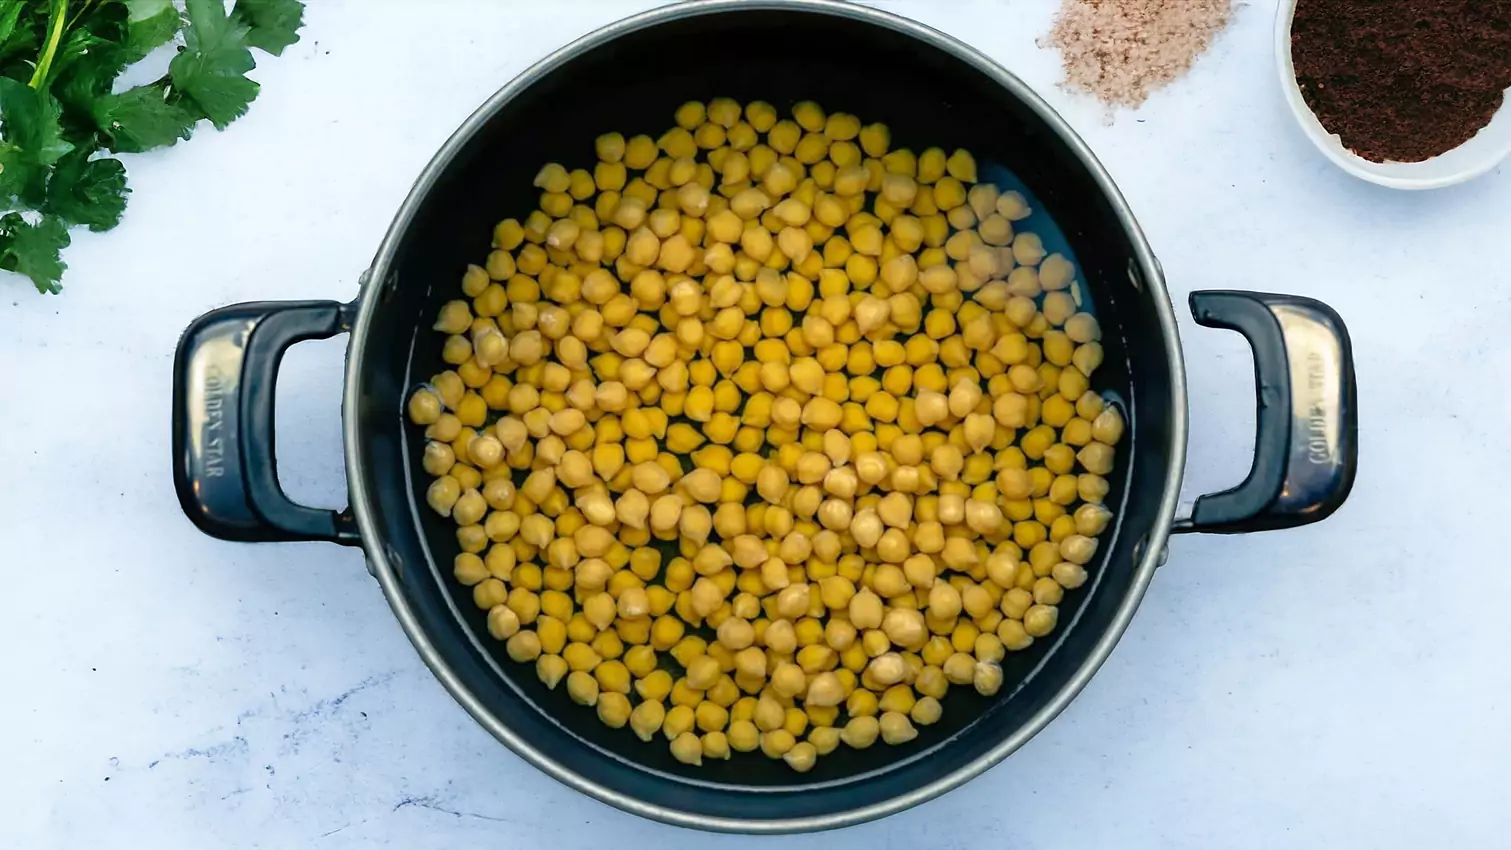 Cooking Chickpeas on the Stove